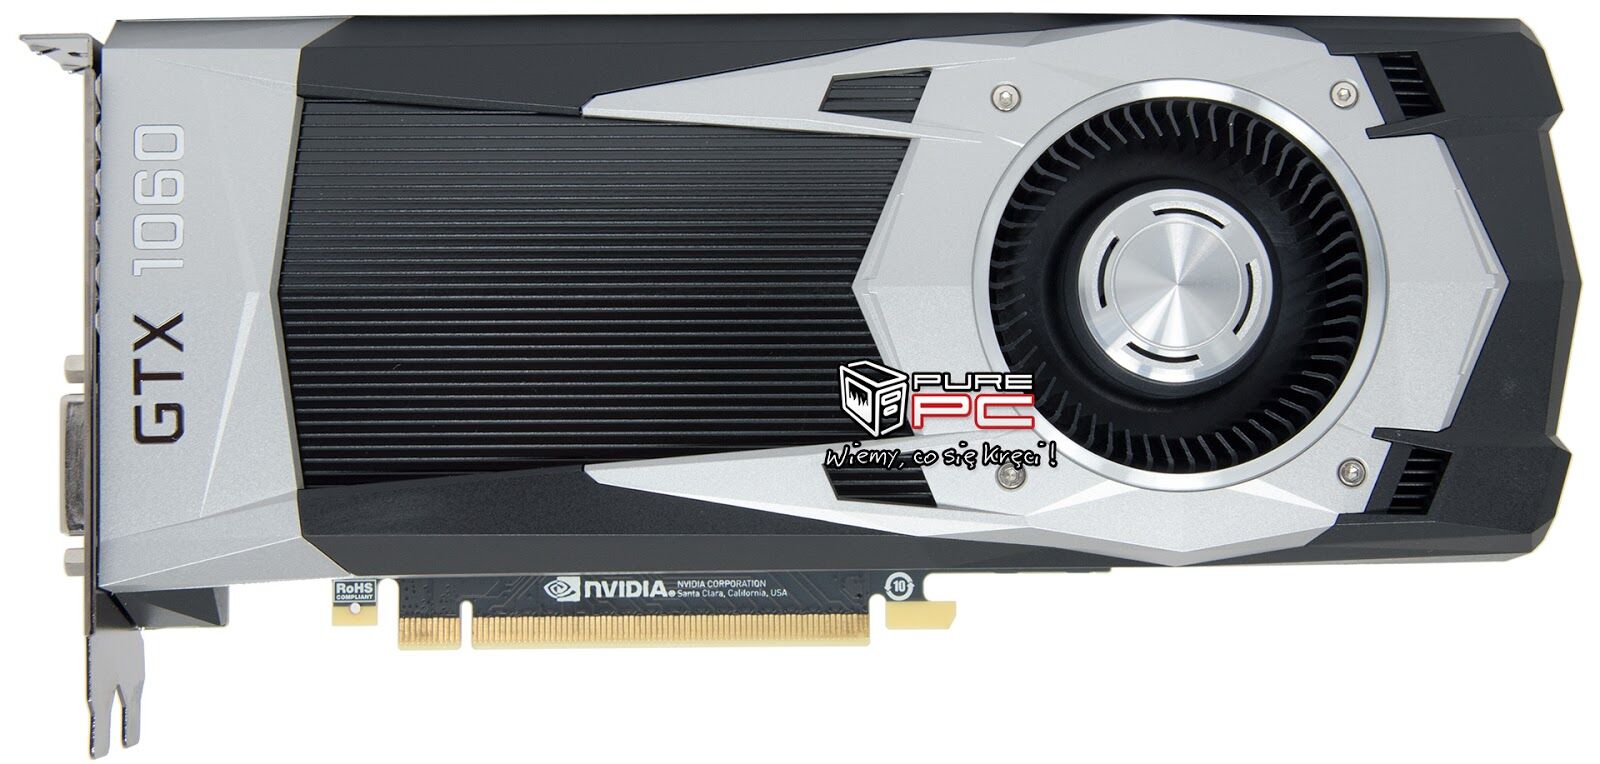 NVIDIA GeForce GTX 1060 Specifications Leaked, Faster than RX 480